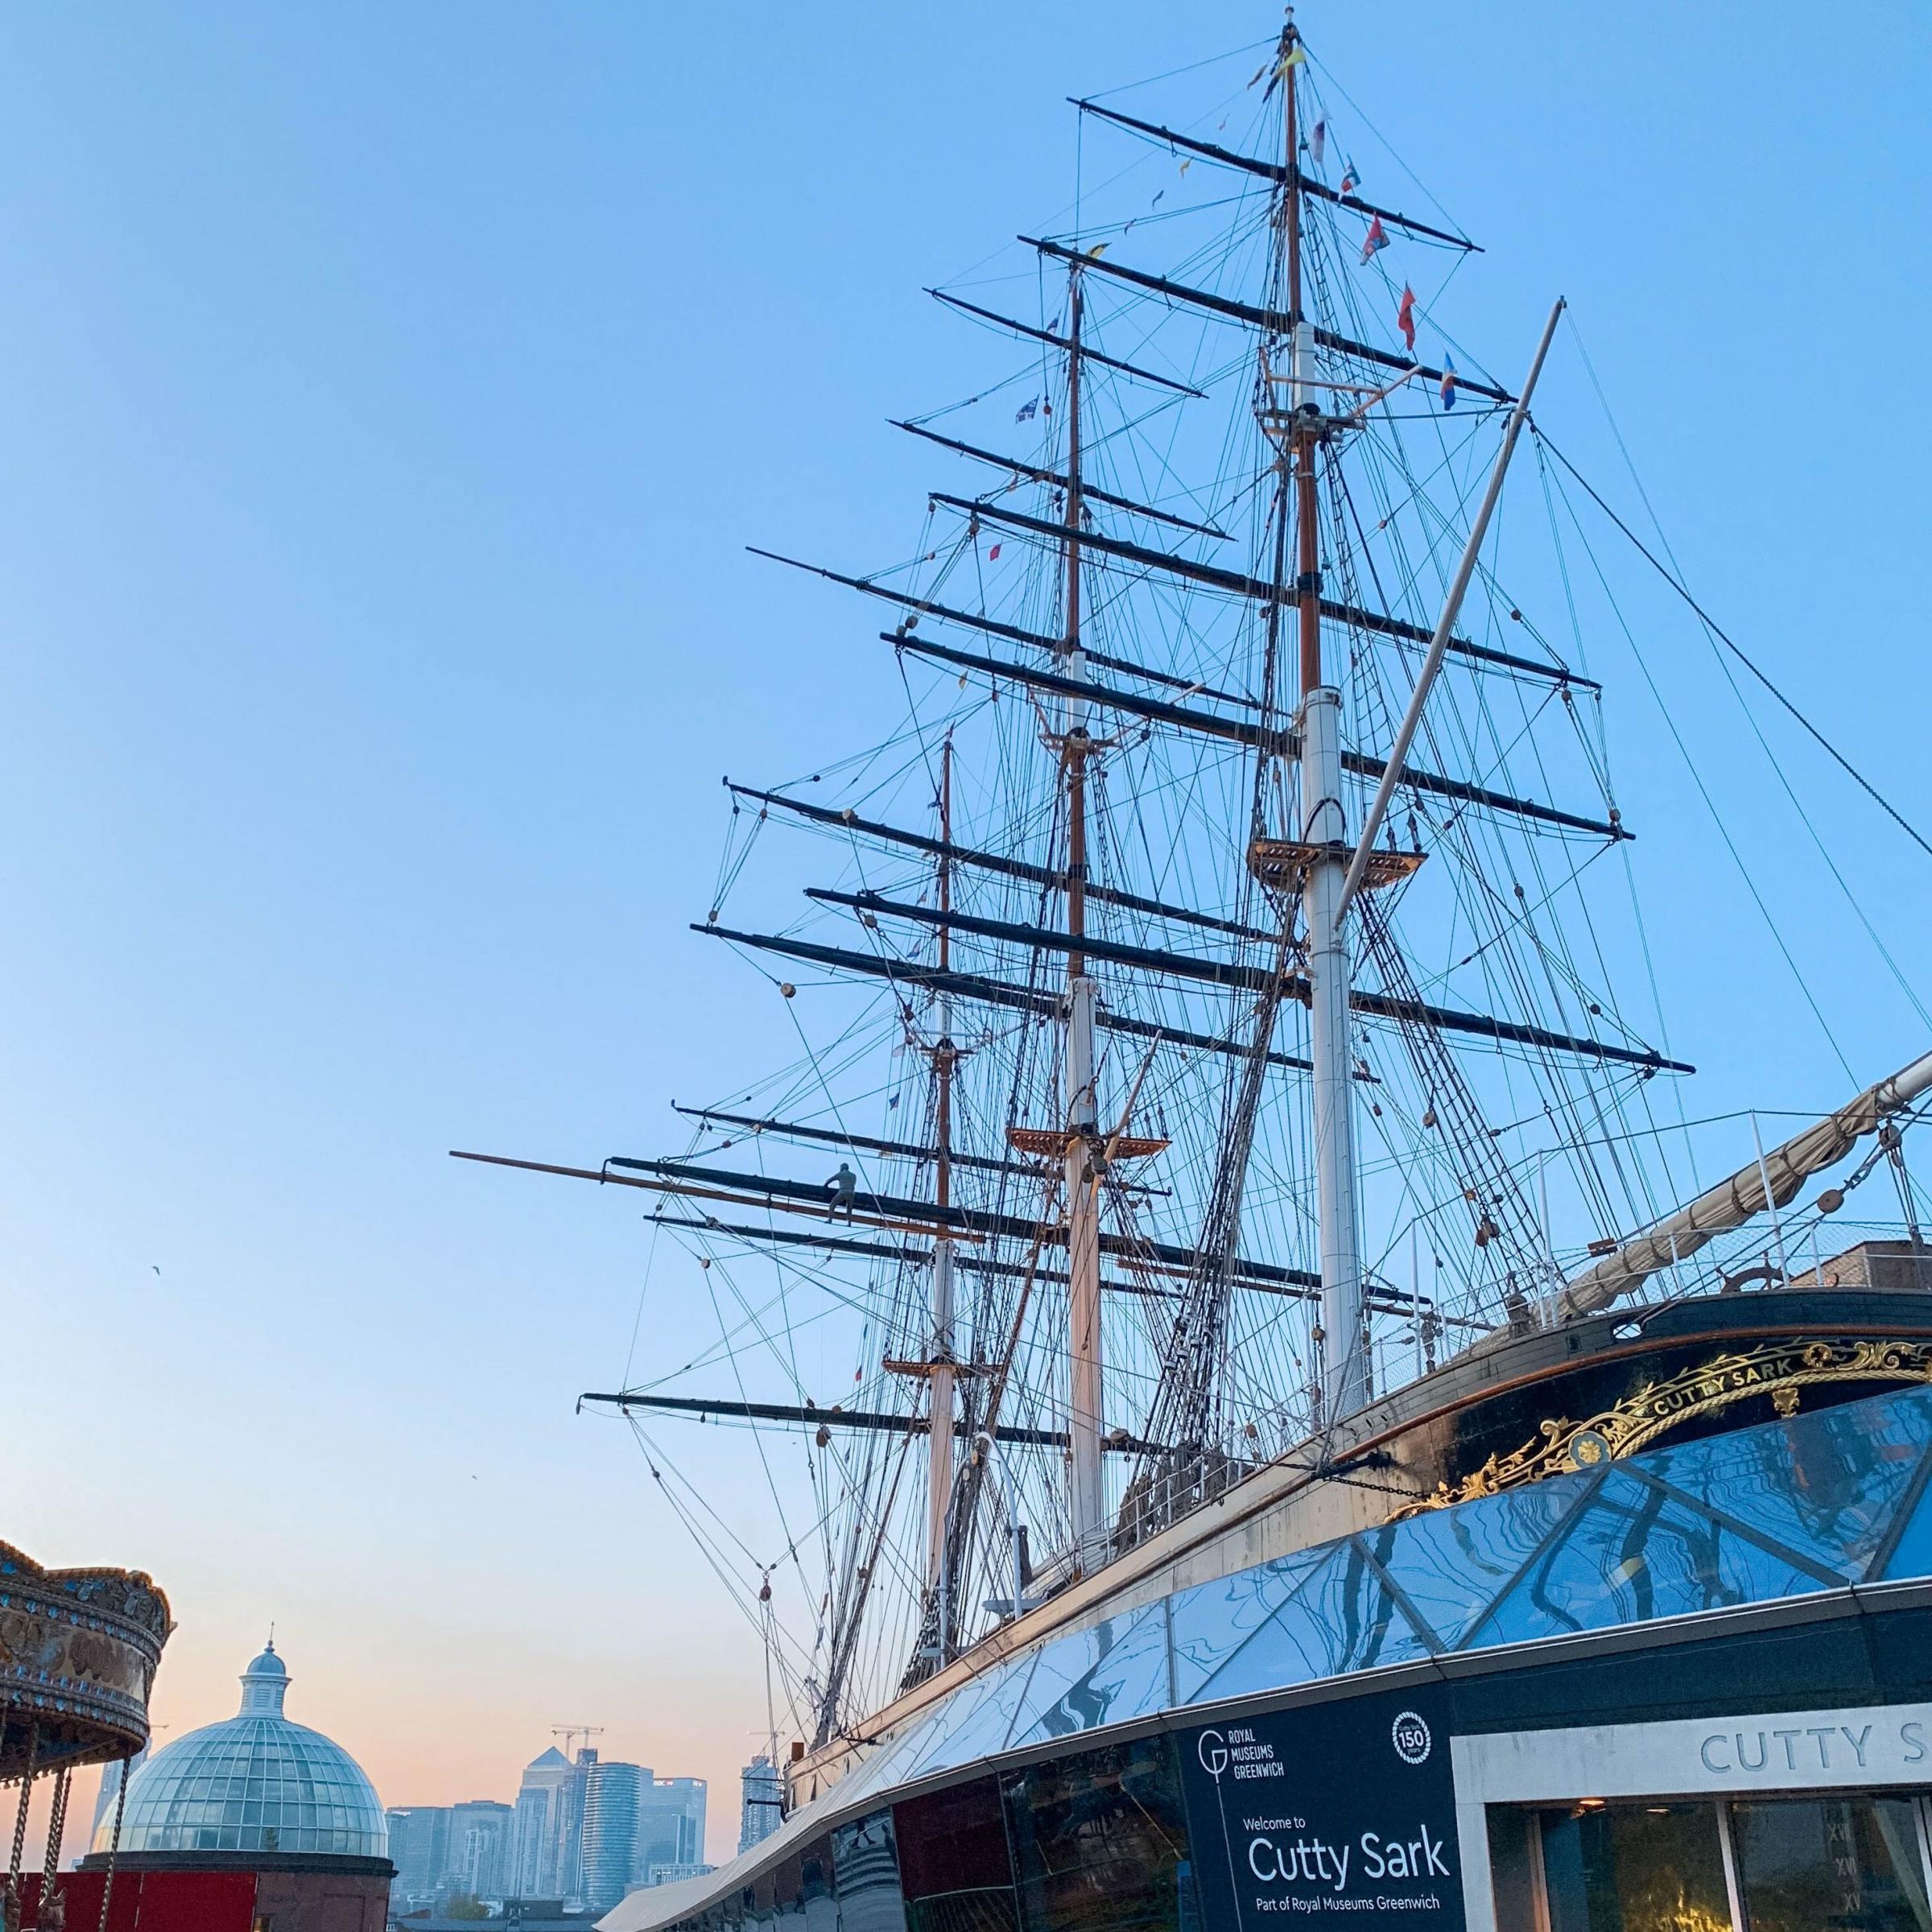 Royal Museums Greenwich - Cutty Sark